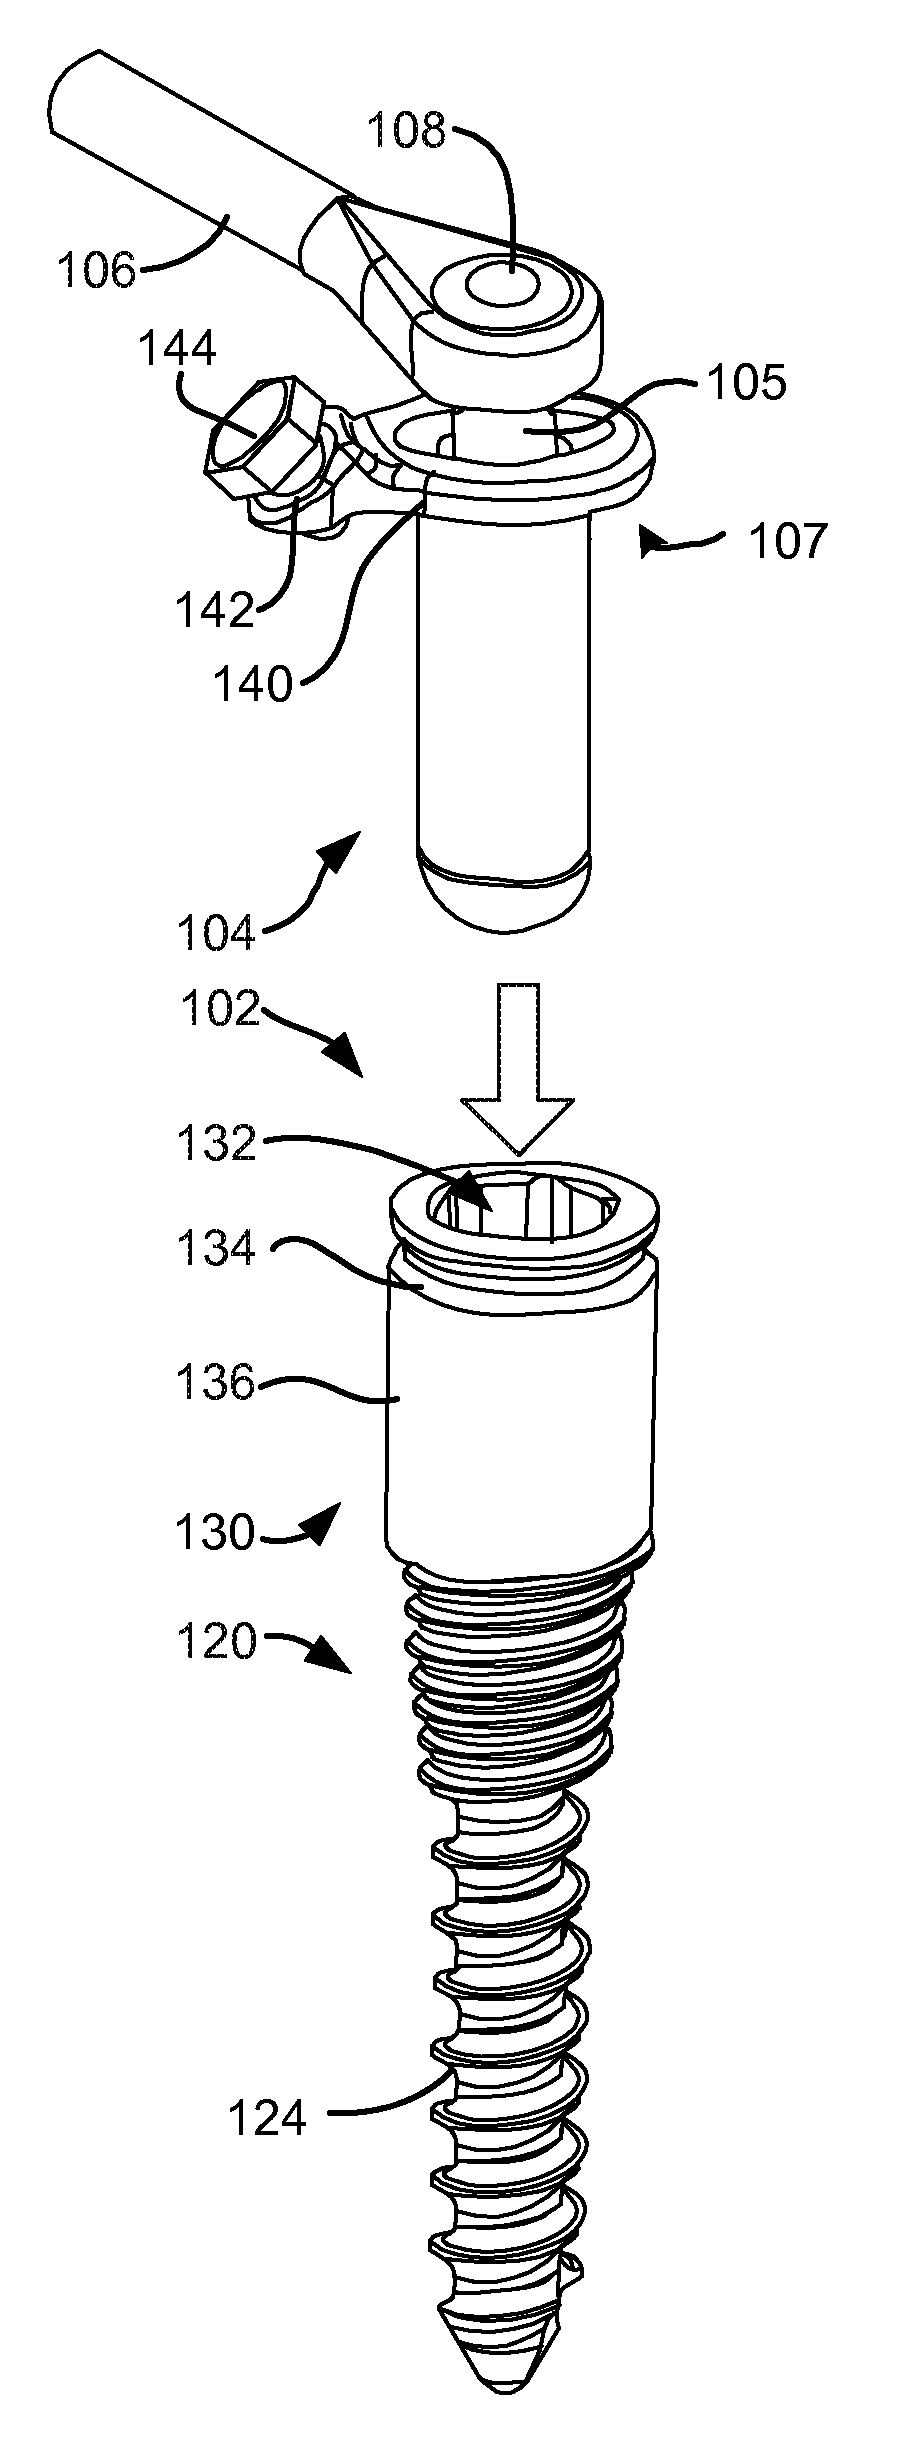 Load-sharing bone anchor having a durable compliant member and method for dynamic stabilization of the spine